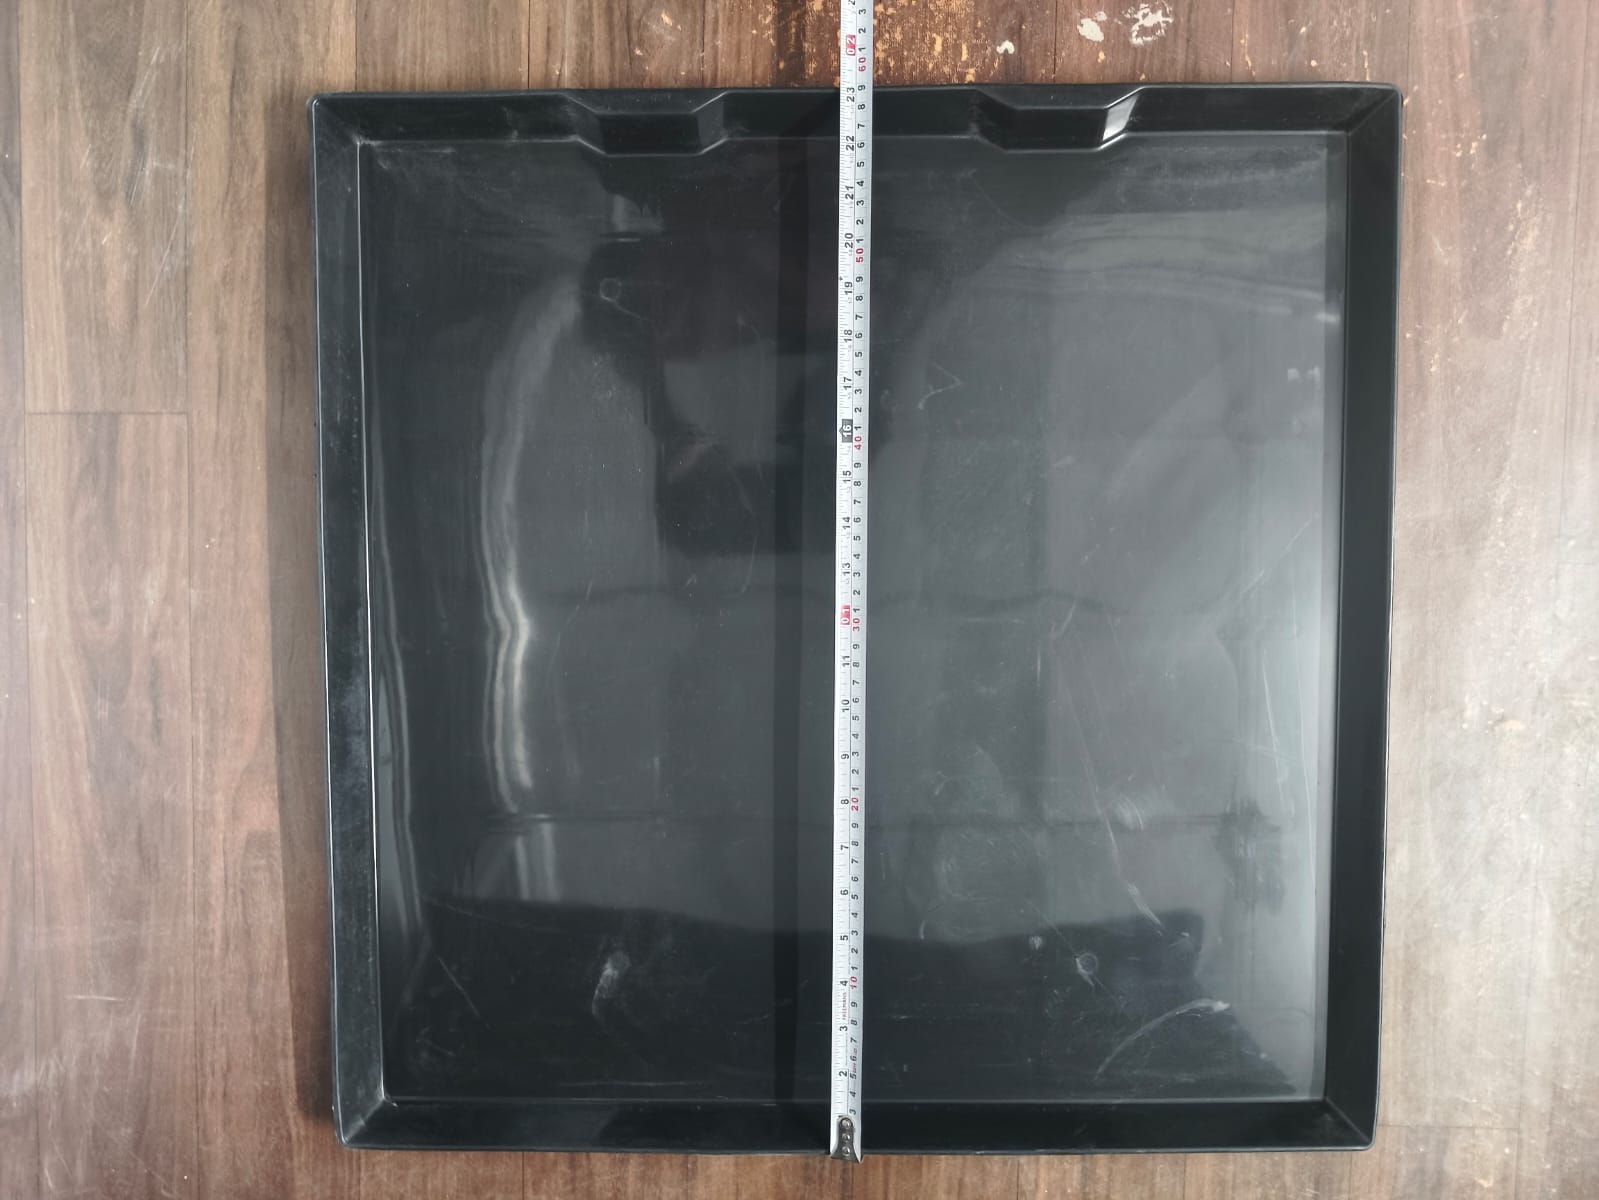 Removable Plastic Tray for Birds Cage (2 * 2 Feet)